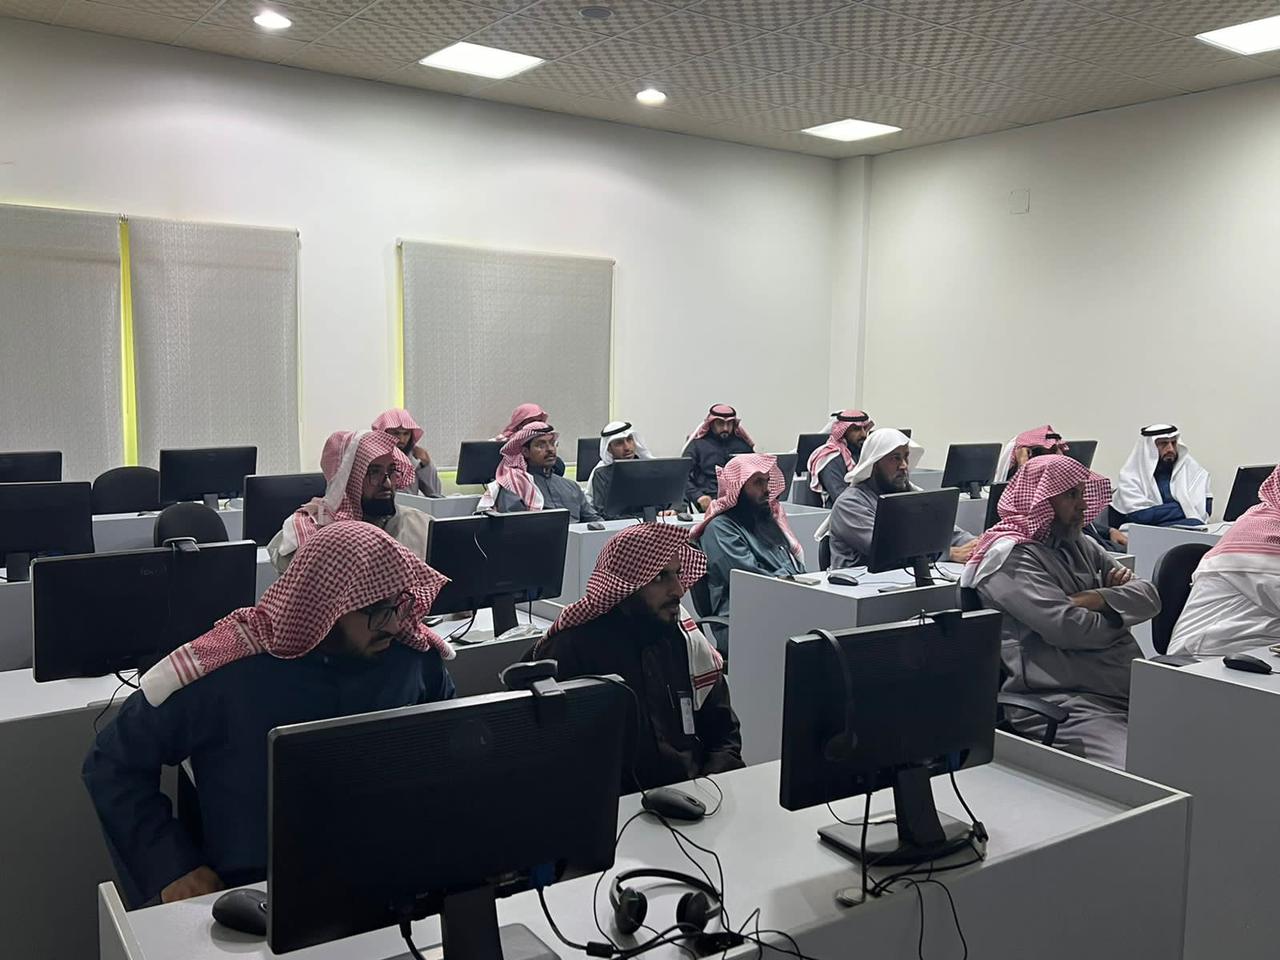 Mustaqbal University is hosting a training program for members of the Commission for the Promotion of Virtue and the Prevention of Vice in Qassim region.